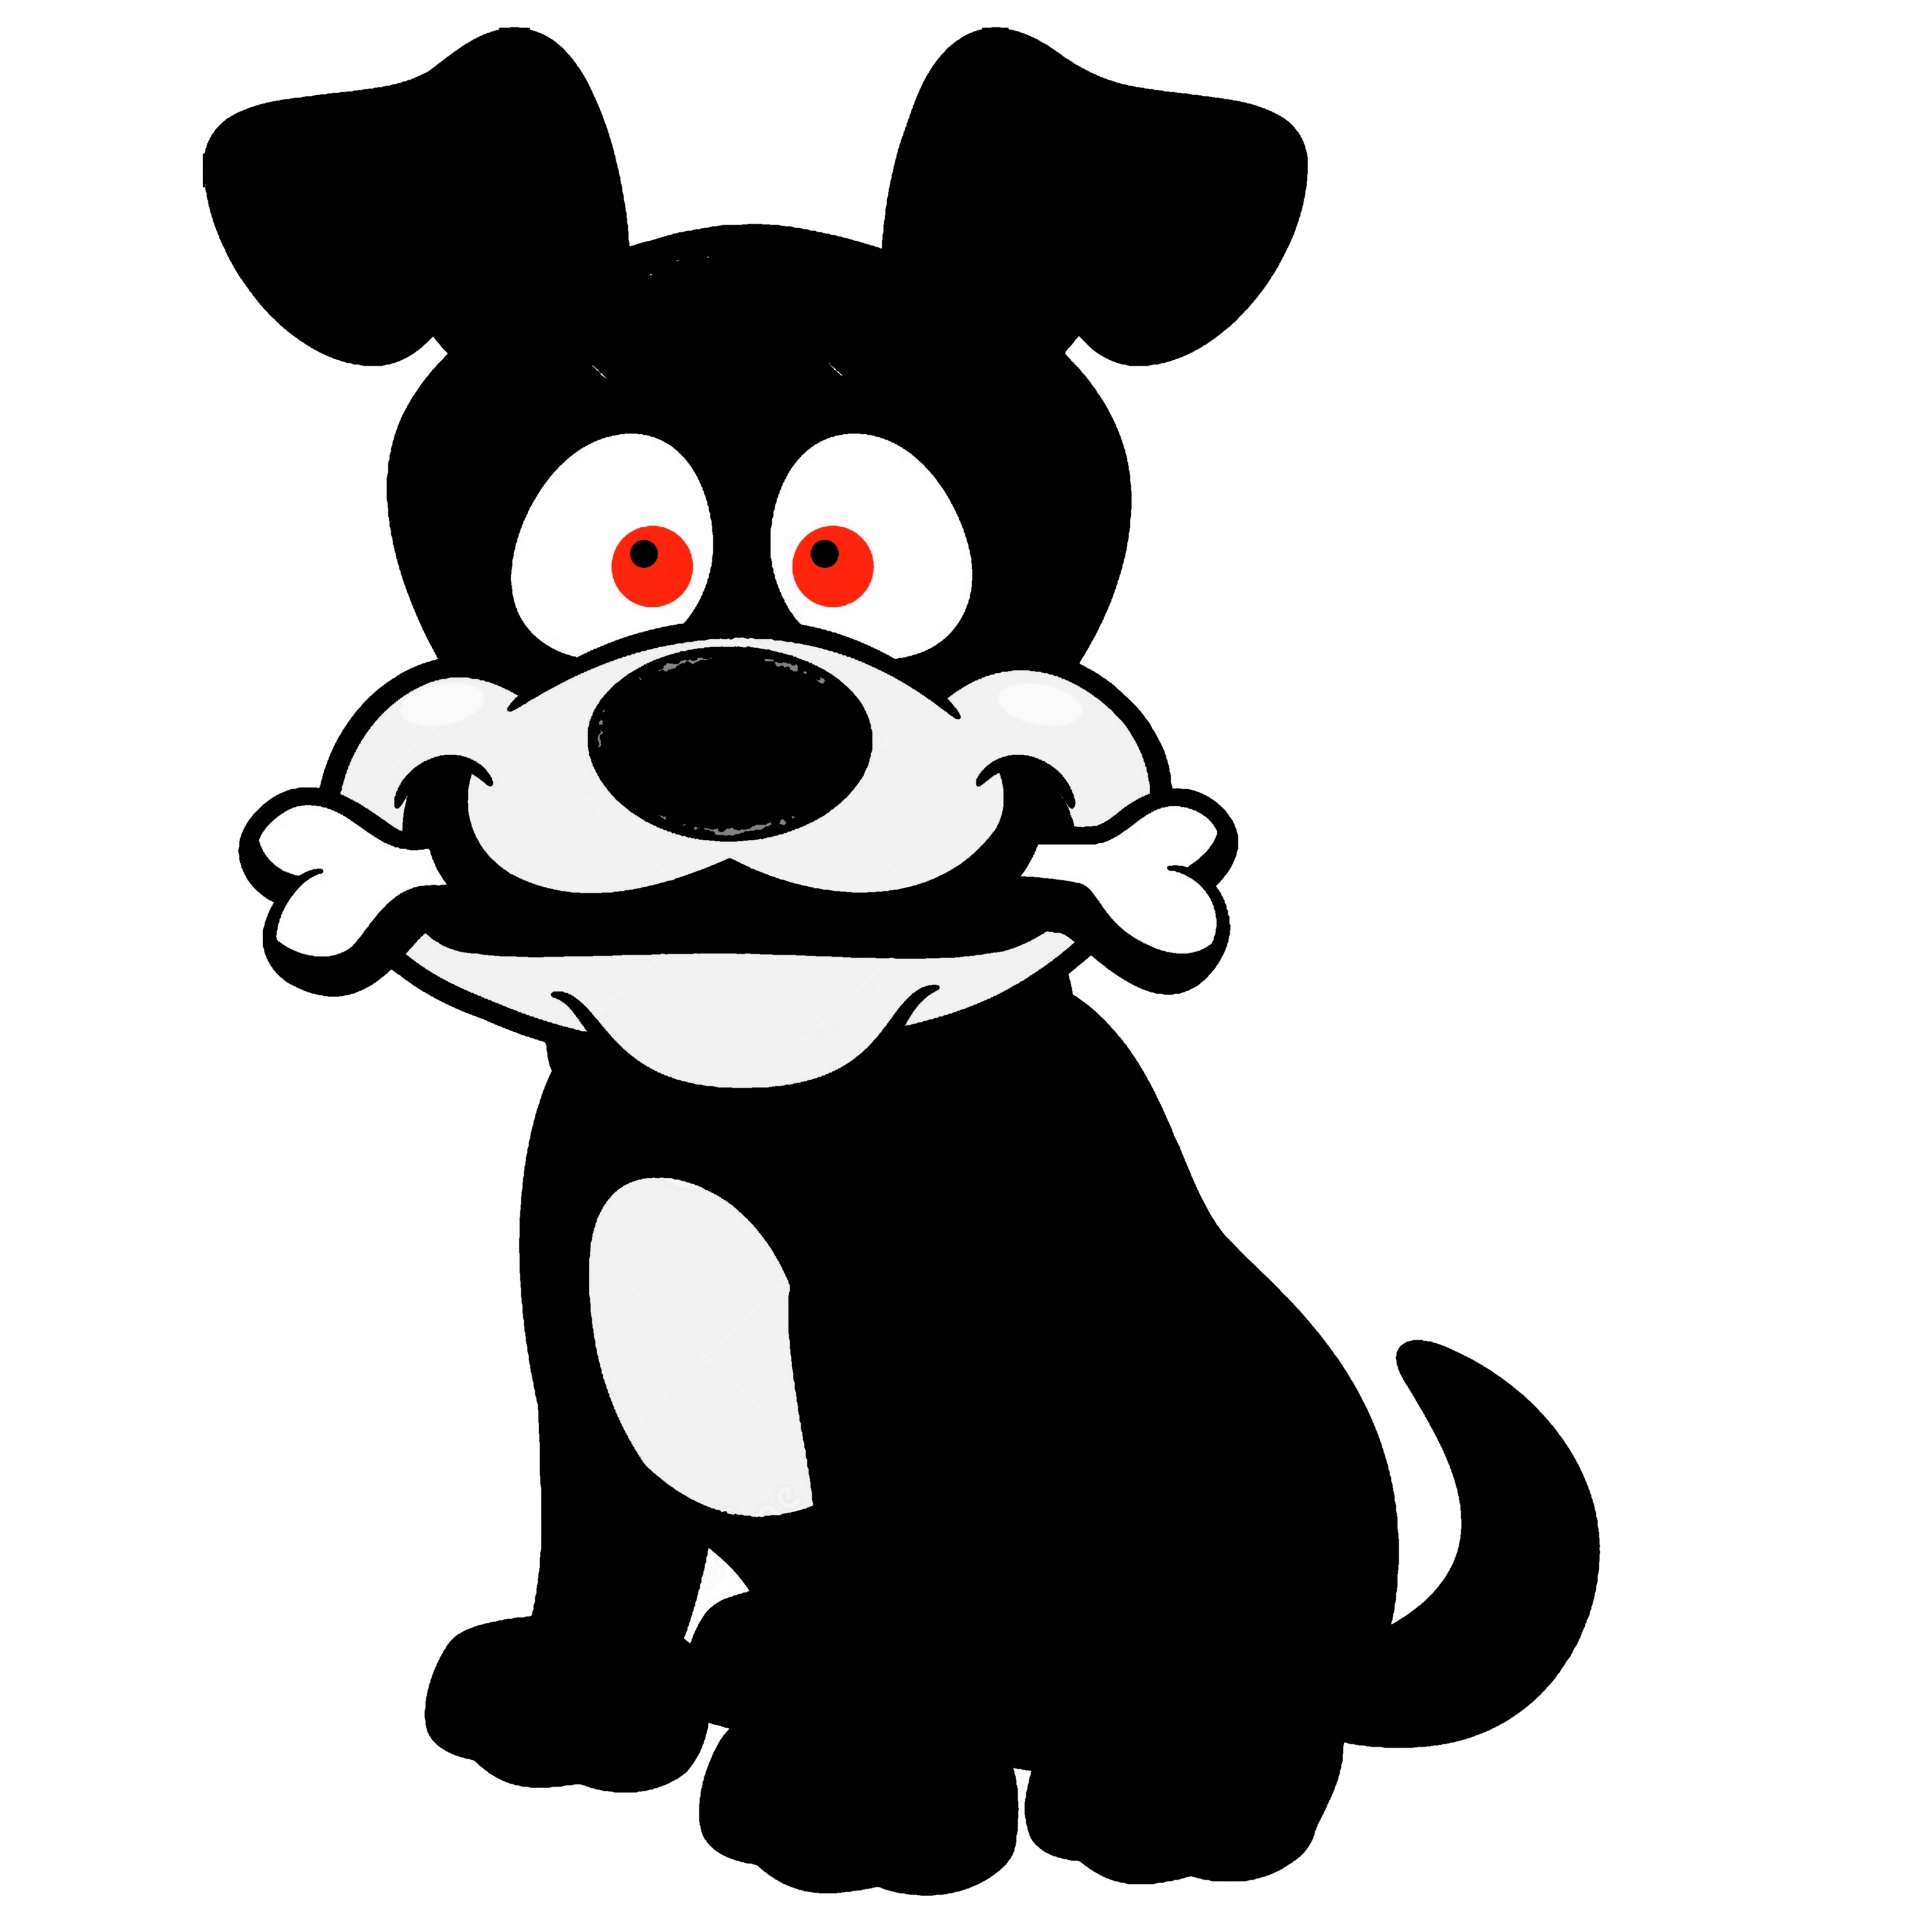 Download free photo of Black,dog,cartoon,silhouette,bone - from 